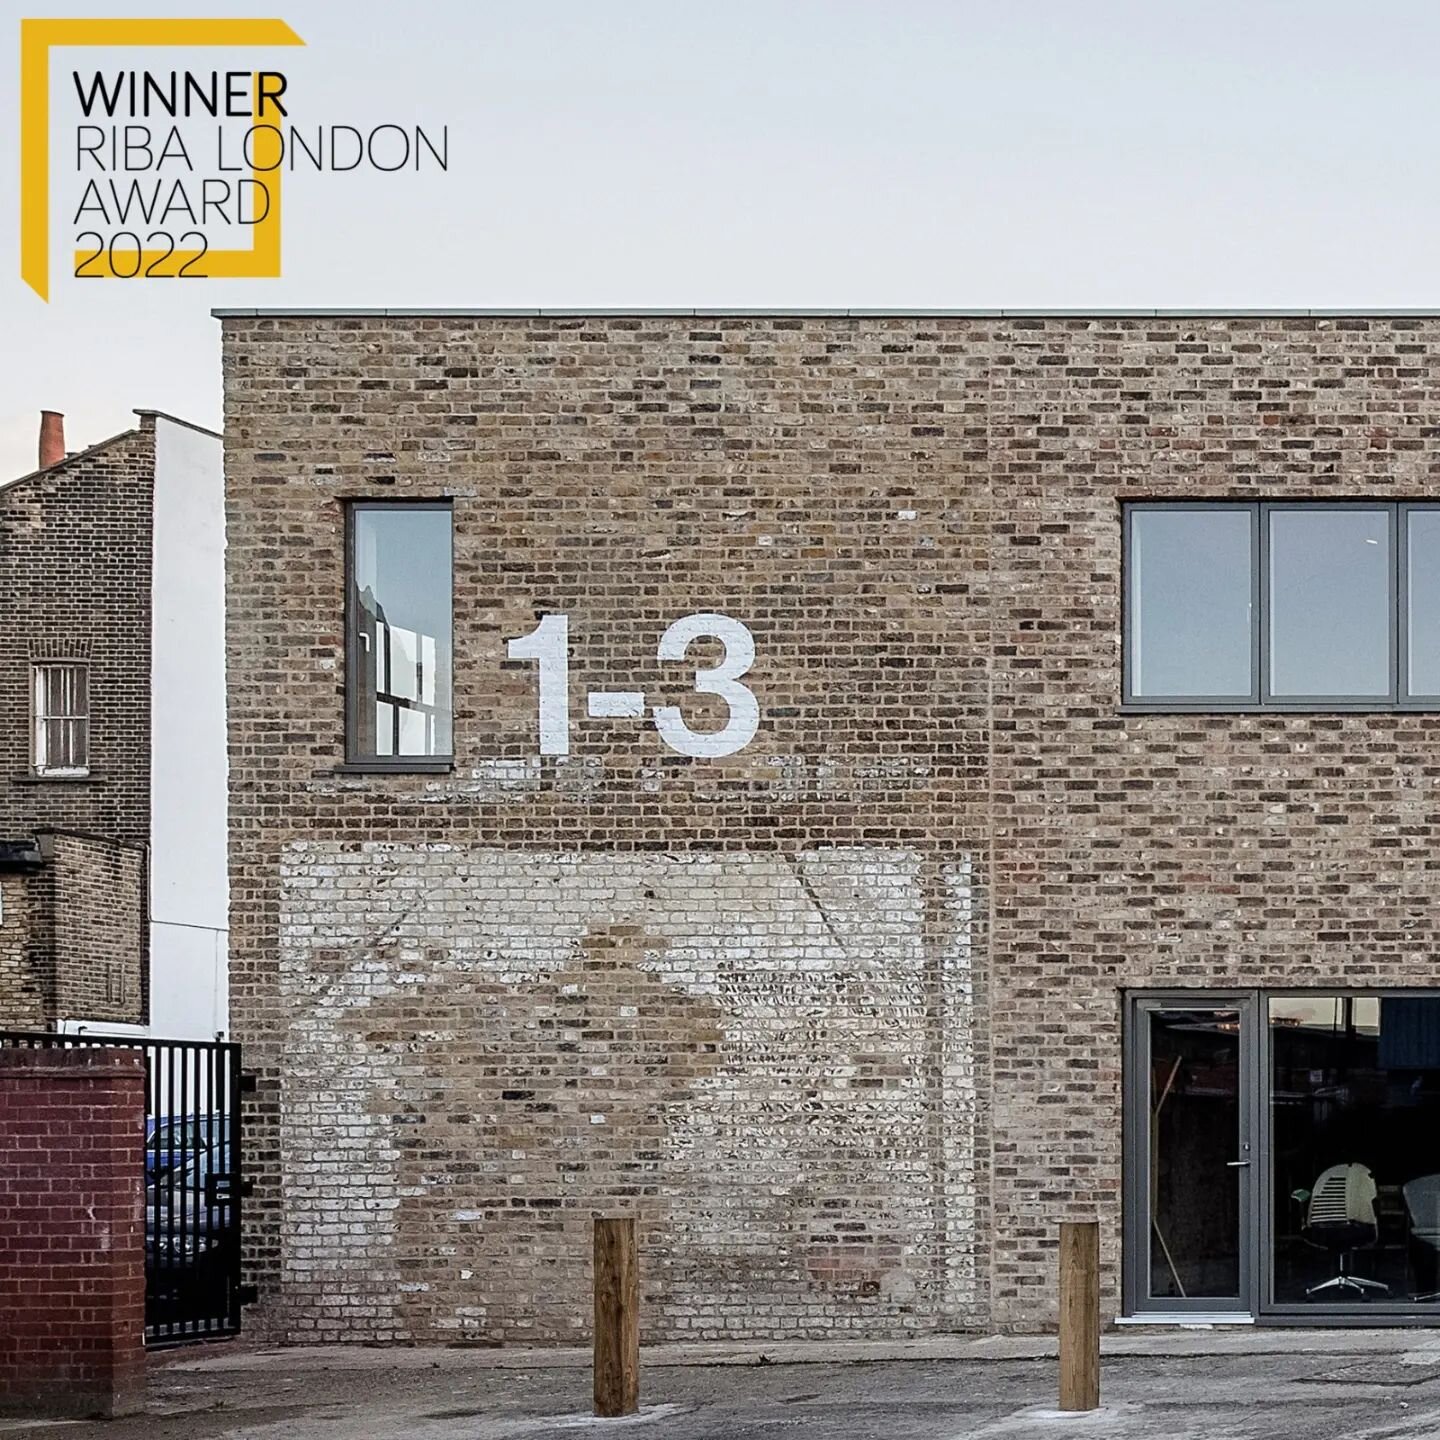 We&rsquo;re honoured that Yorkton Workshops has received a 2022 @riba @ribalondon award. Thank you to everyone involved, especially our enlightened clients and co-designers @pearsonlloyd.

The judges said:
&quot;Yorkton Workshops epitomises what can 